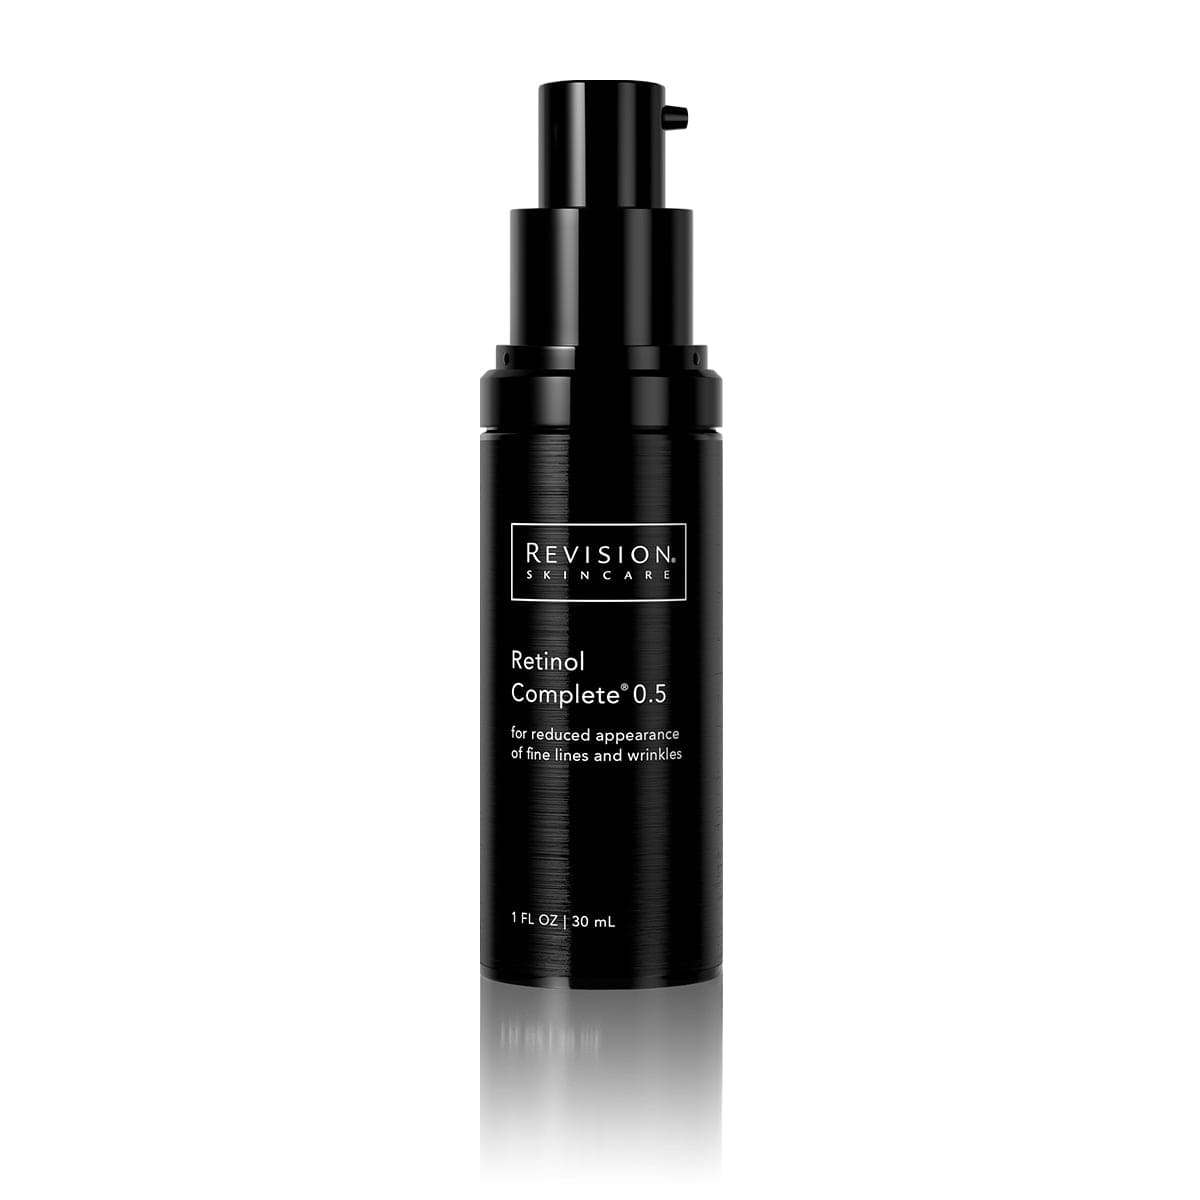 Retinol Complete 0.5- for reduced appearance of fine lines and wrinkles. Pump Front